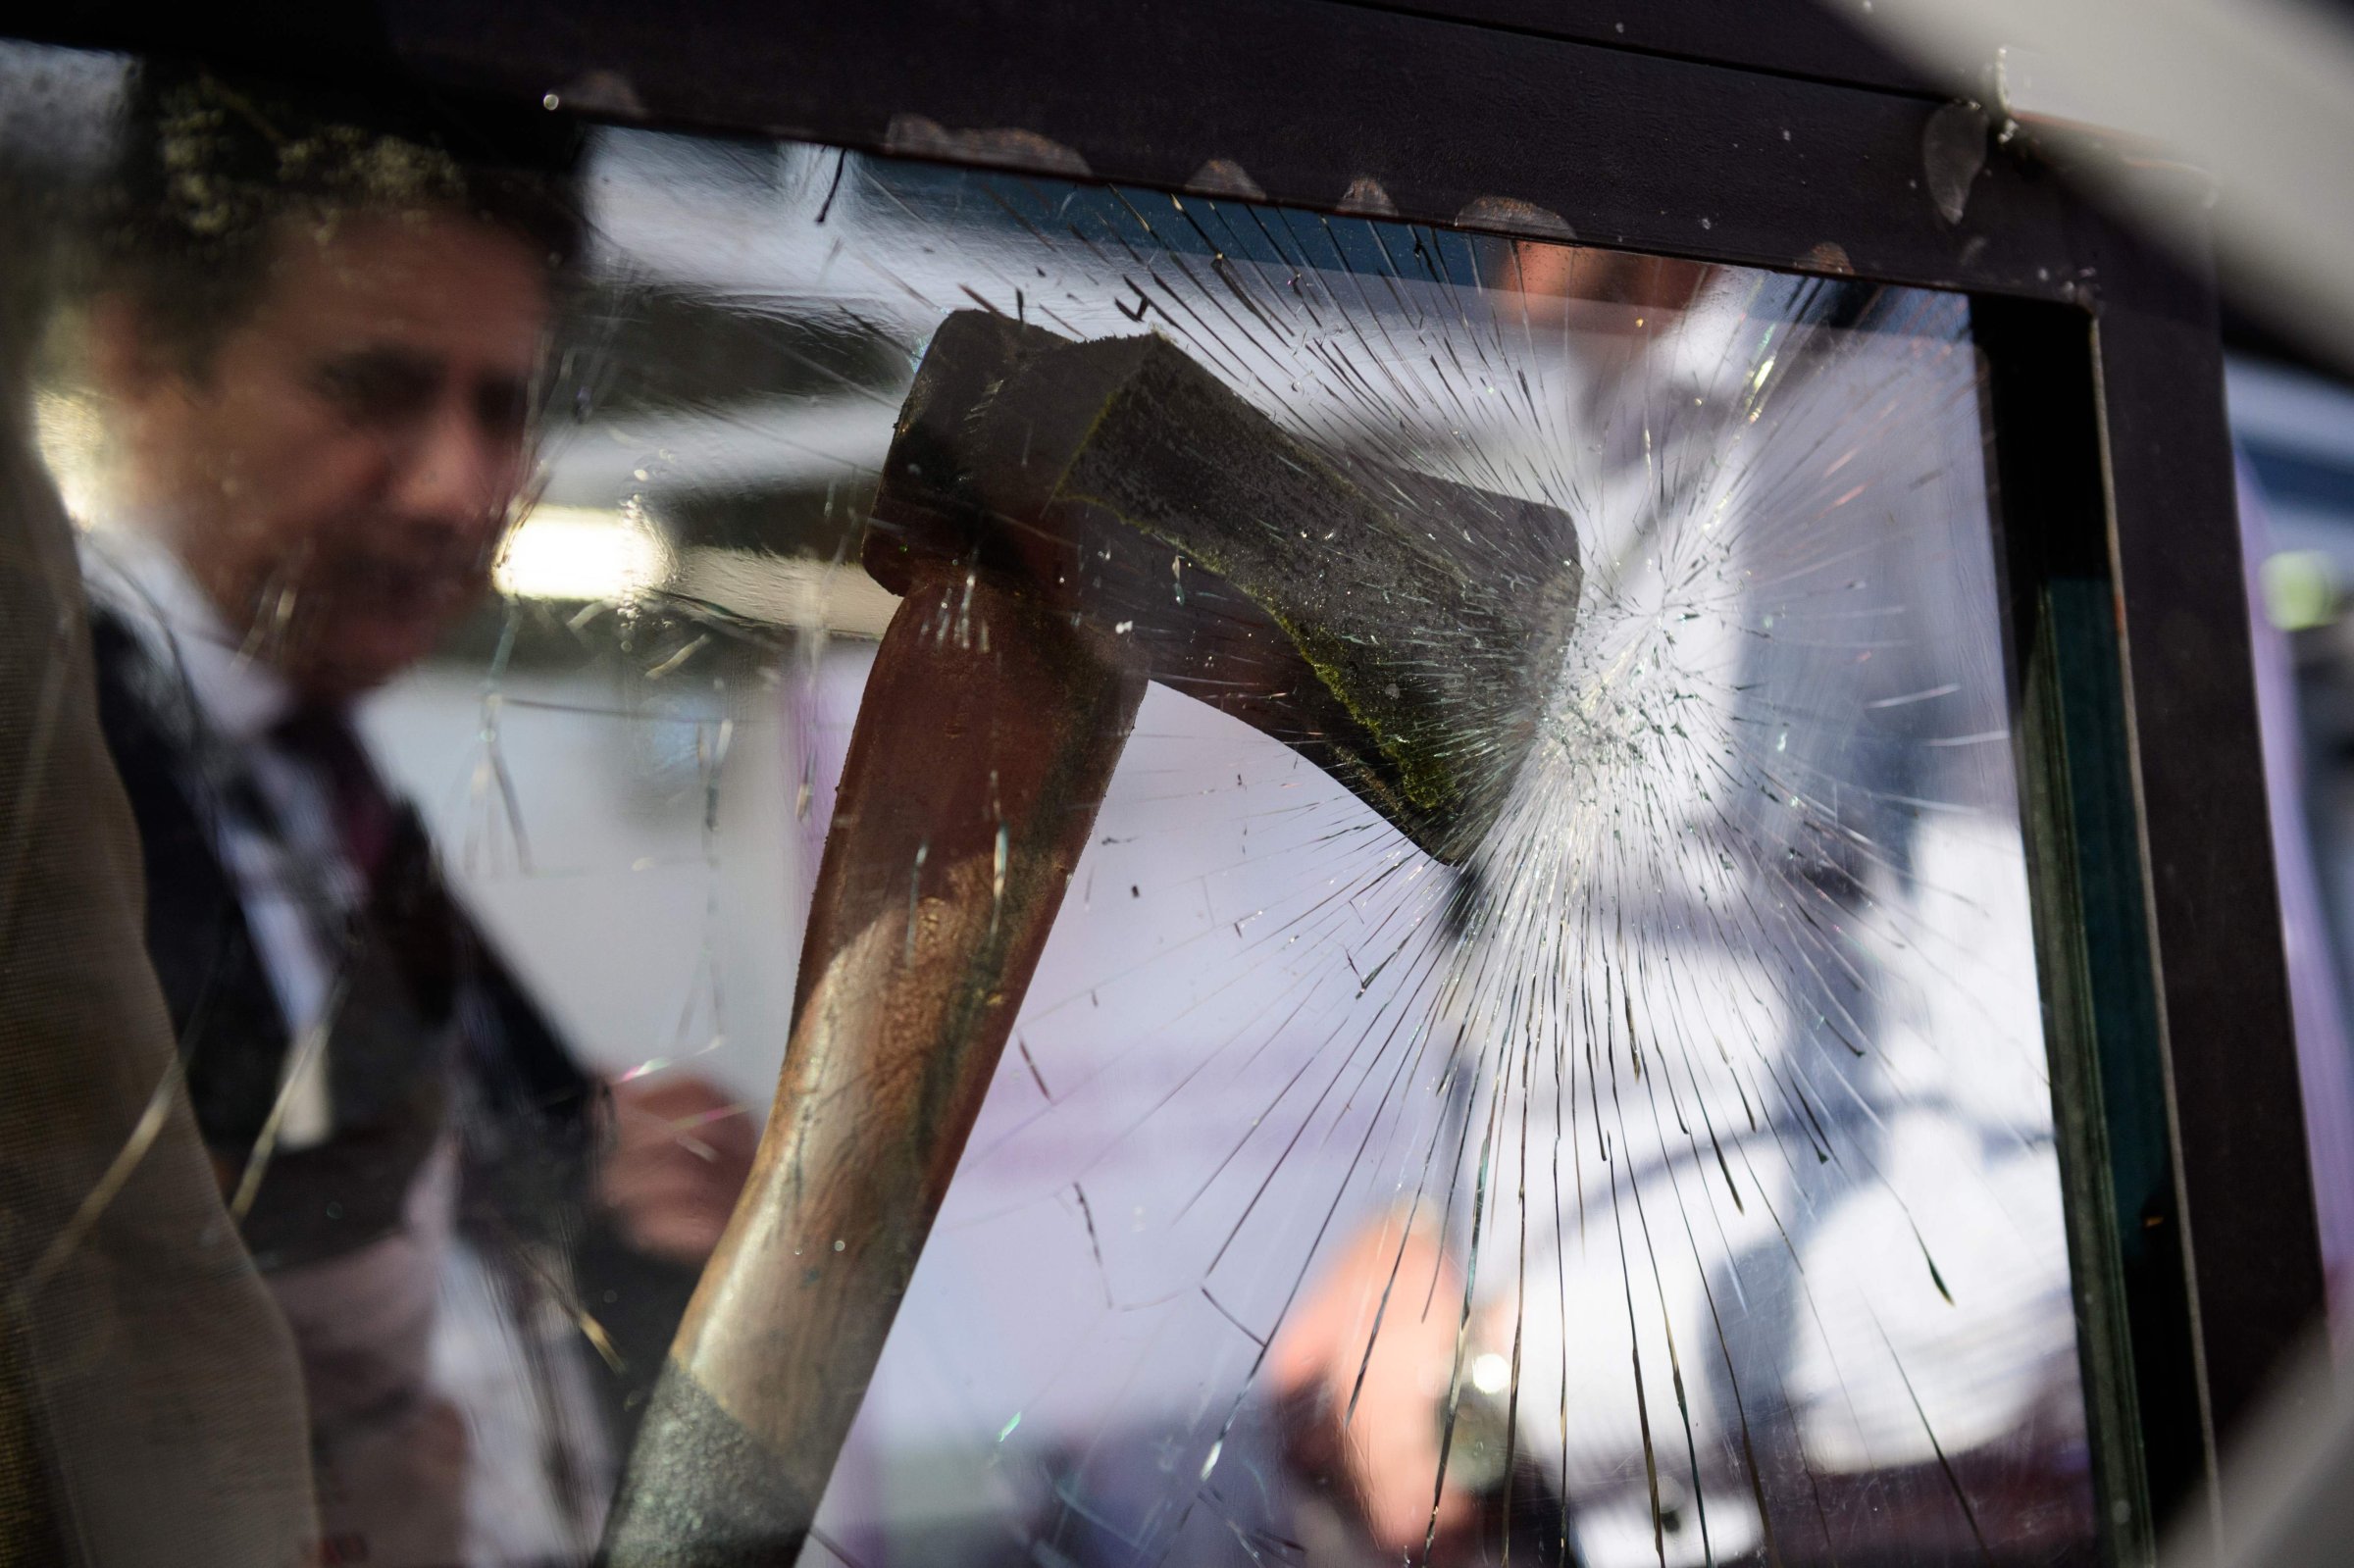 An axe and the effect it has on ballistic glass is displayed during the "Security and Counter Terror Expo" at the Olympia centre in west London on April 19, 2016.